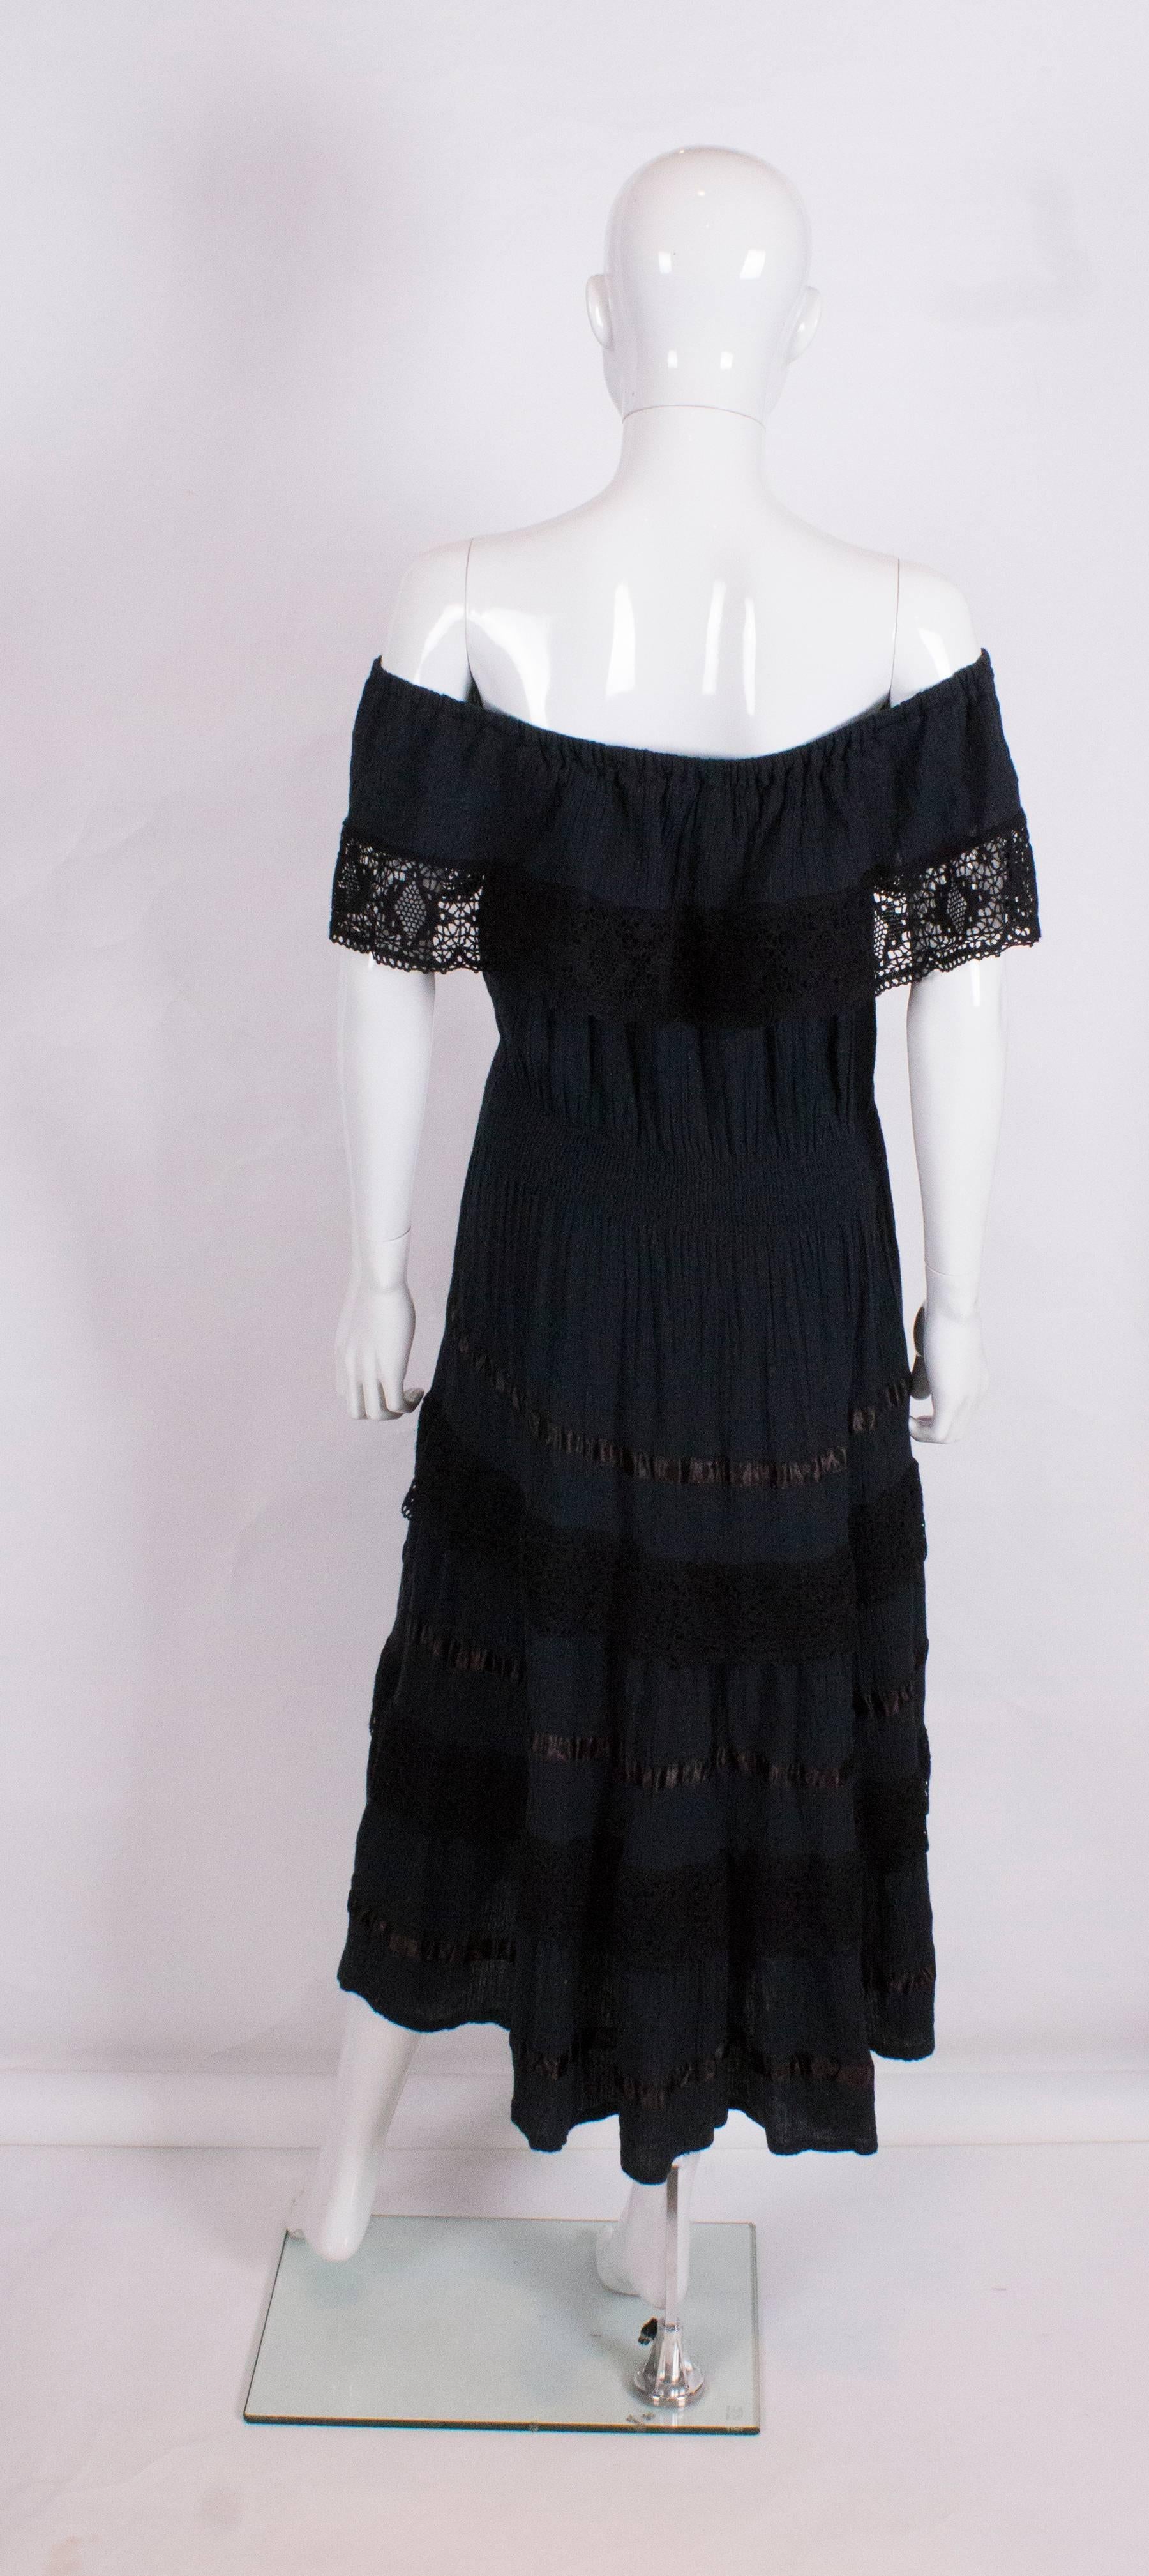 Women's Black On/Off Shoulder Dress with Crochet Border and Ribbon Detail For Sale